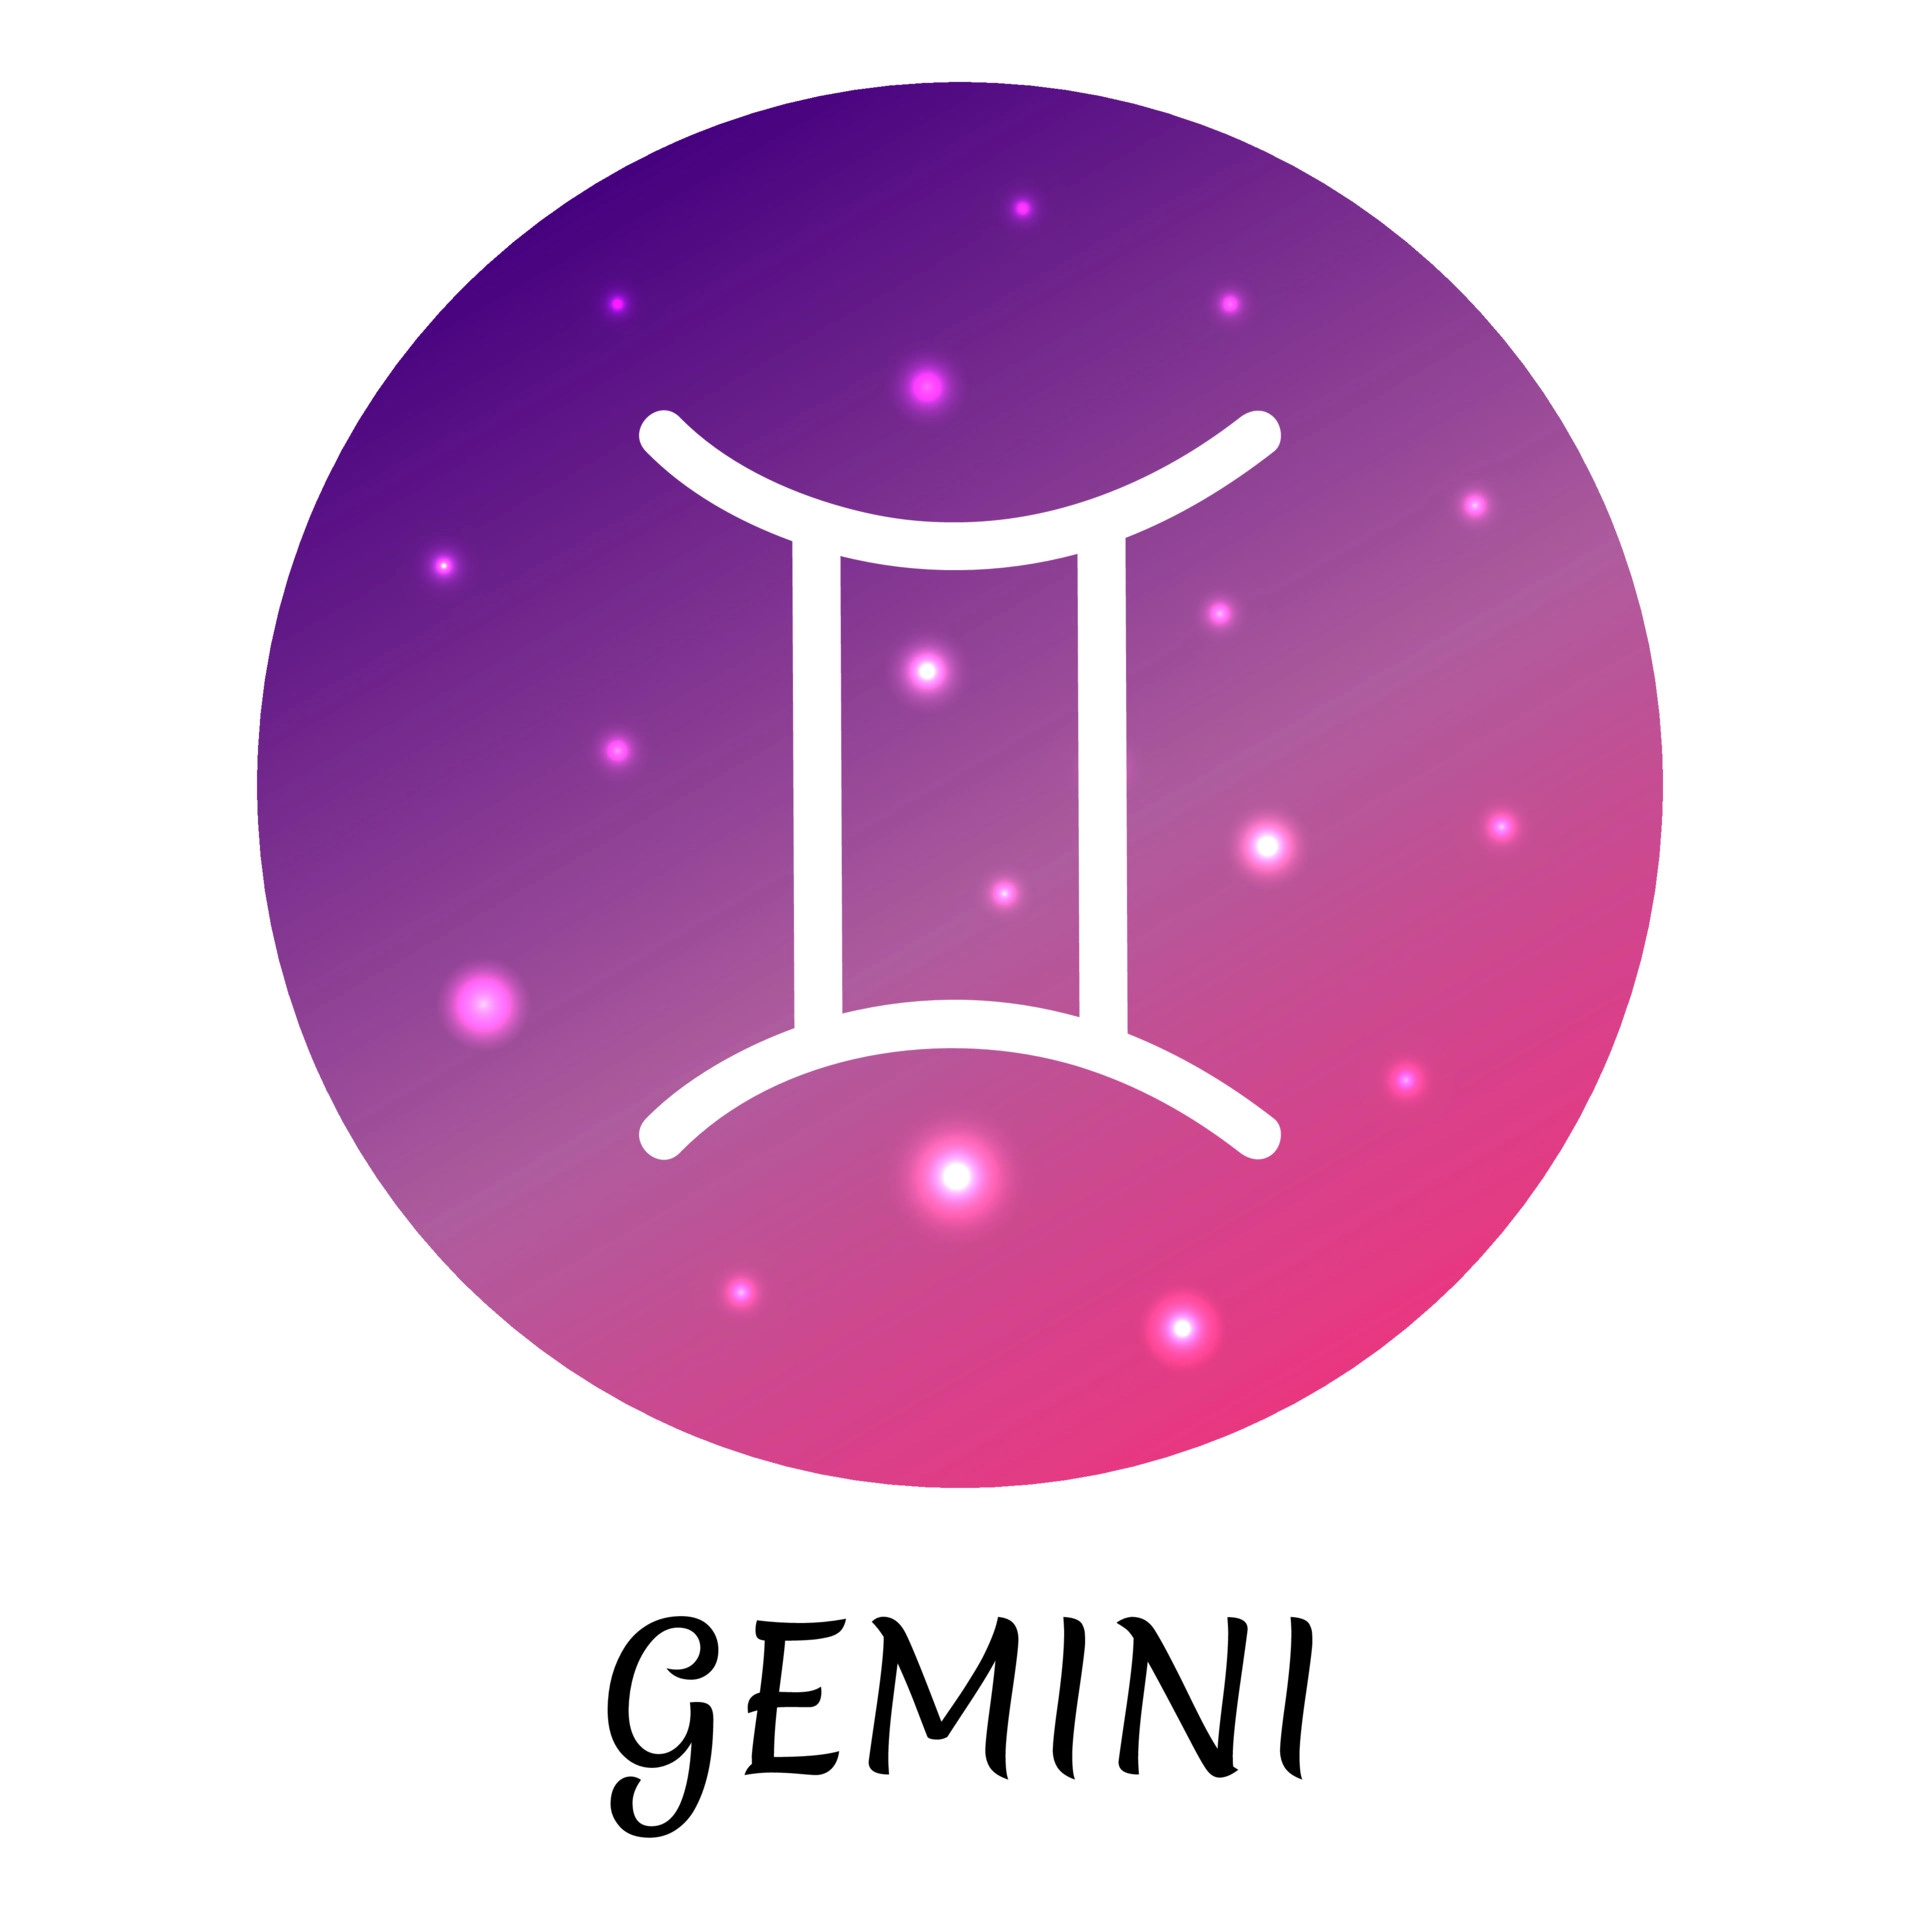 Gemini zodiac sign, Icon with starry gradient, Astrological element, 1920x1920 HD Handy